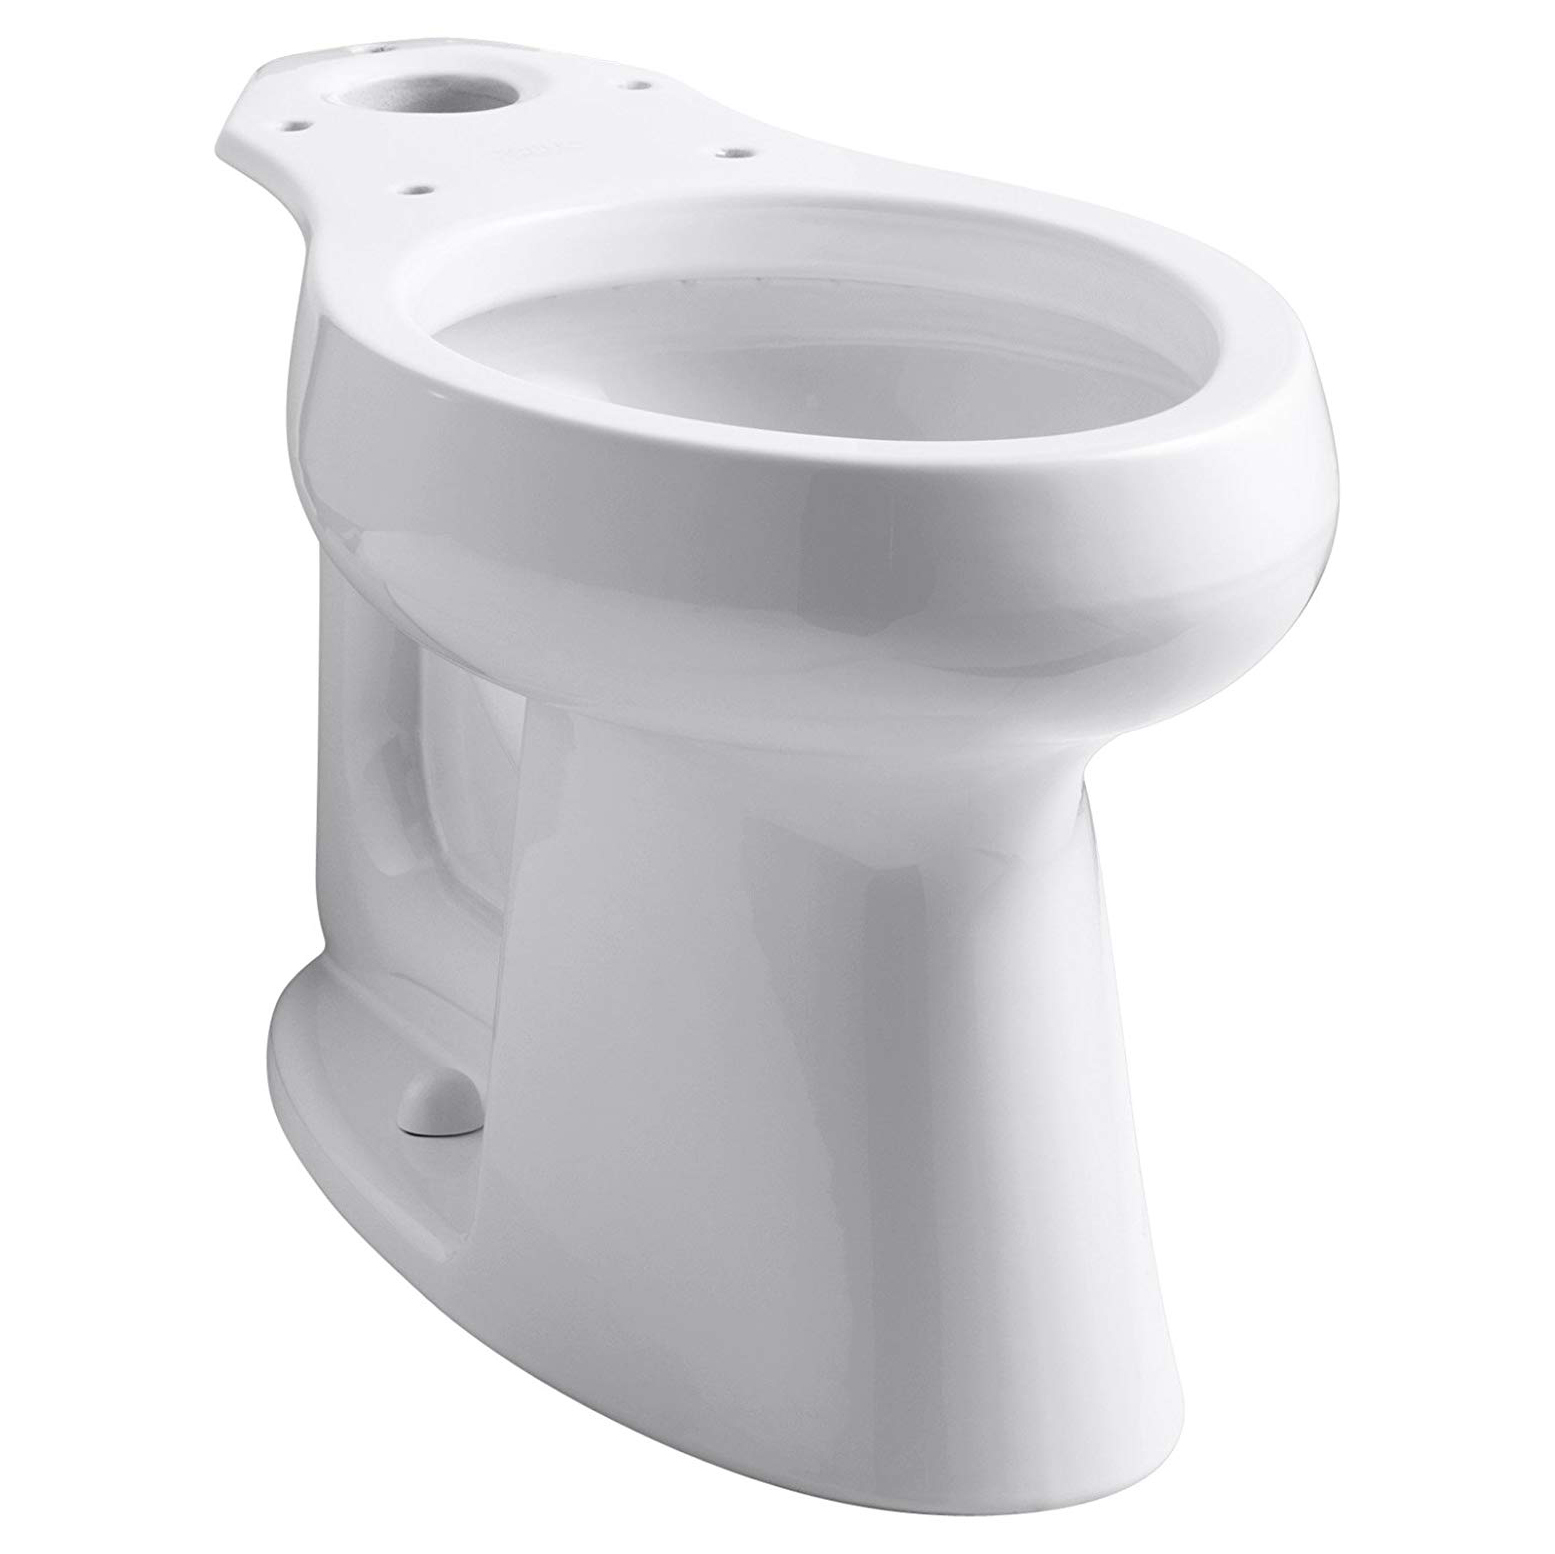 Highline Comfort Height Elongated Toilet Bowl Only in White **SEAT NOT INCLUDED**